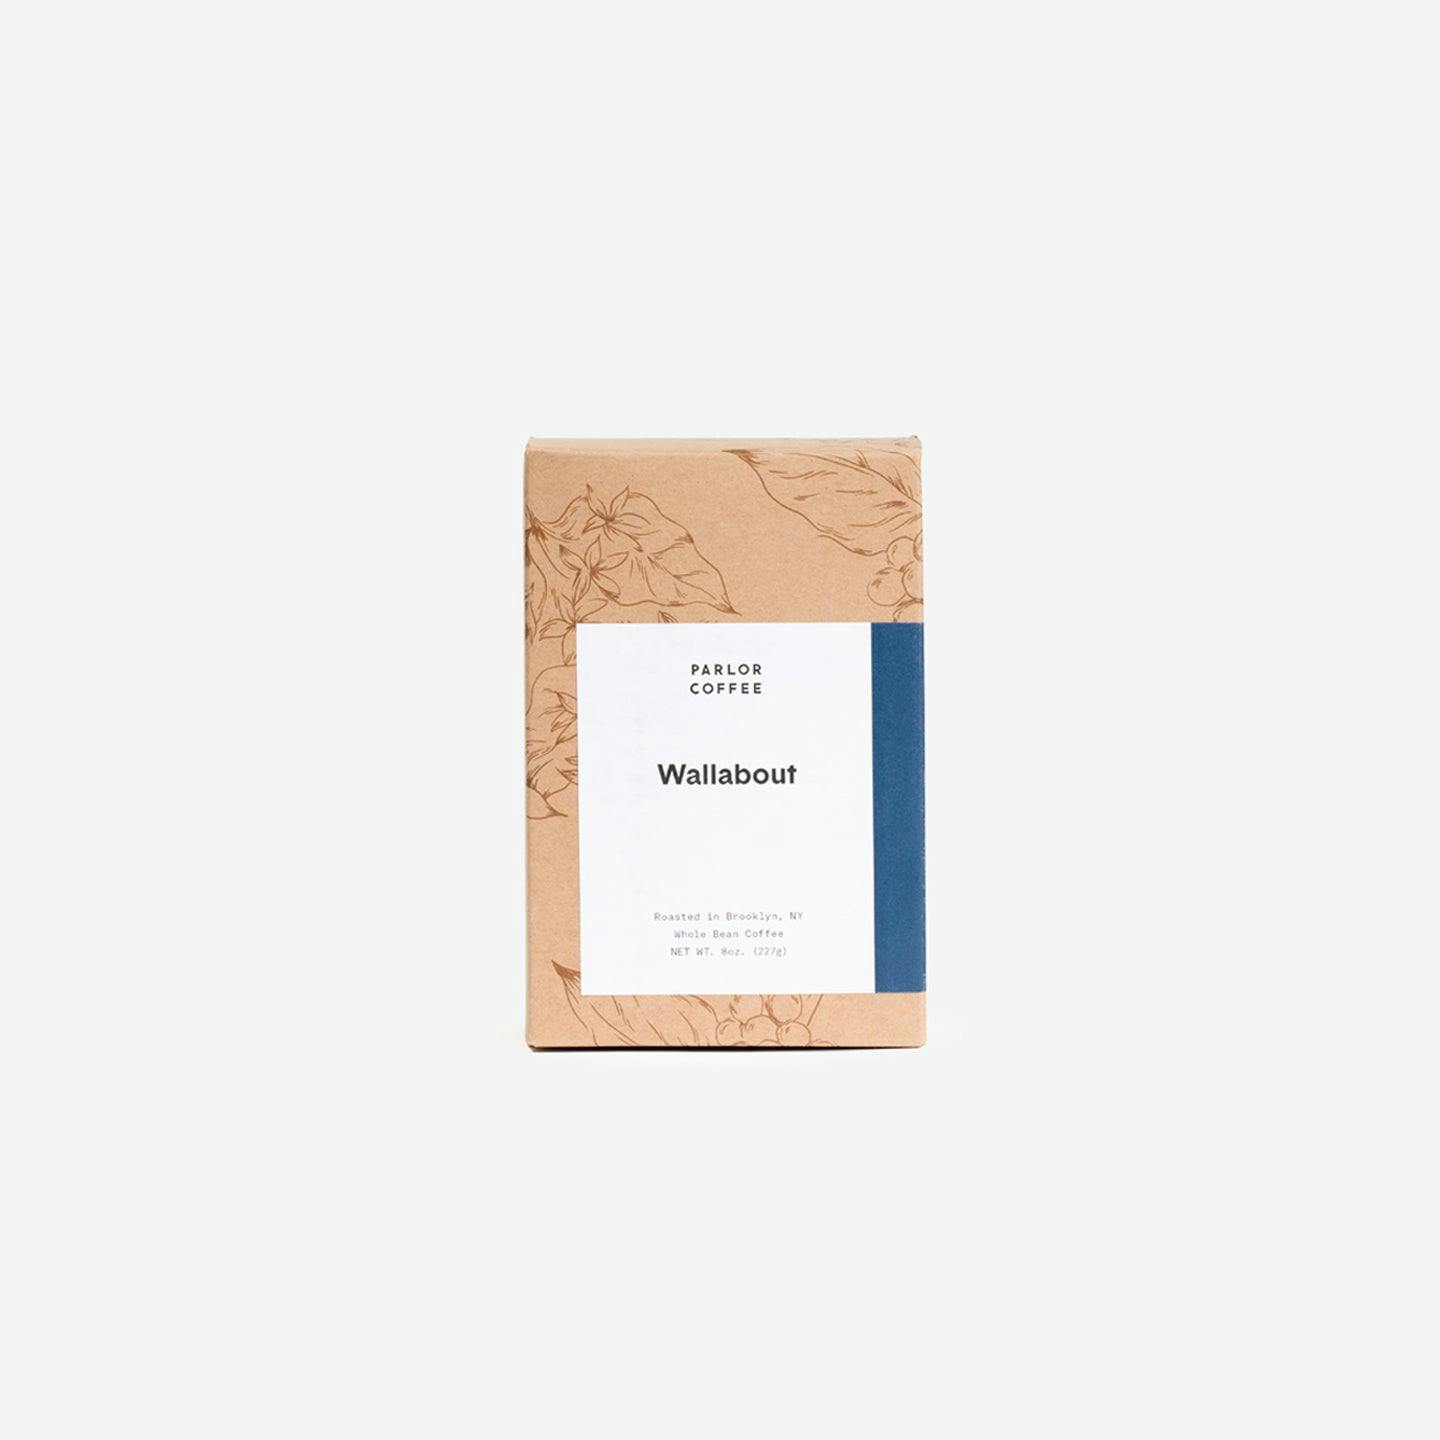 A modern take on classical coffee. With notes of toffee and chocolate, this coffee is perfect for any time of the day and will quickly become your favorite cup of coffee.